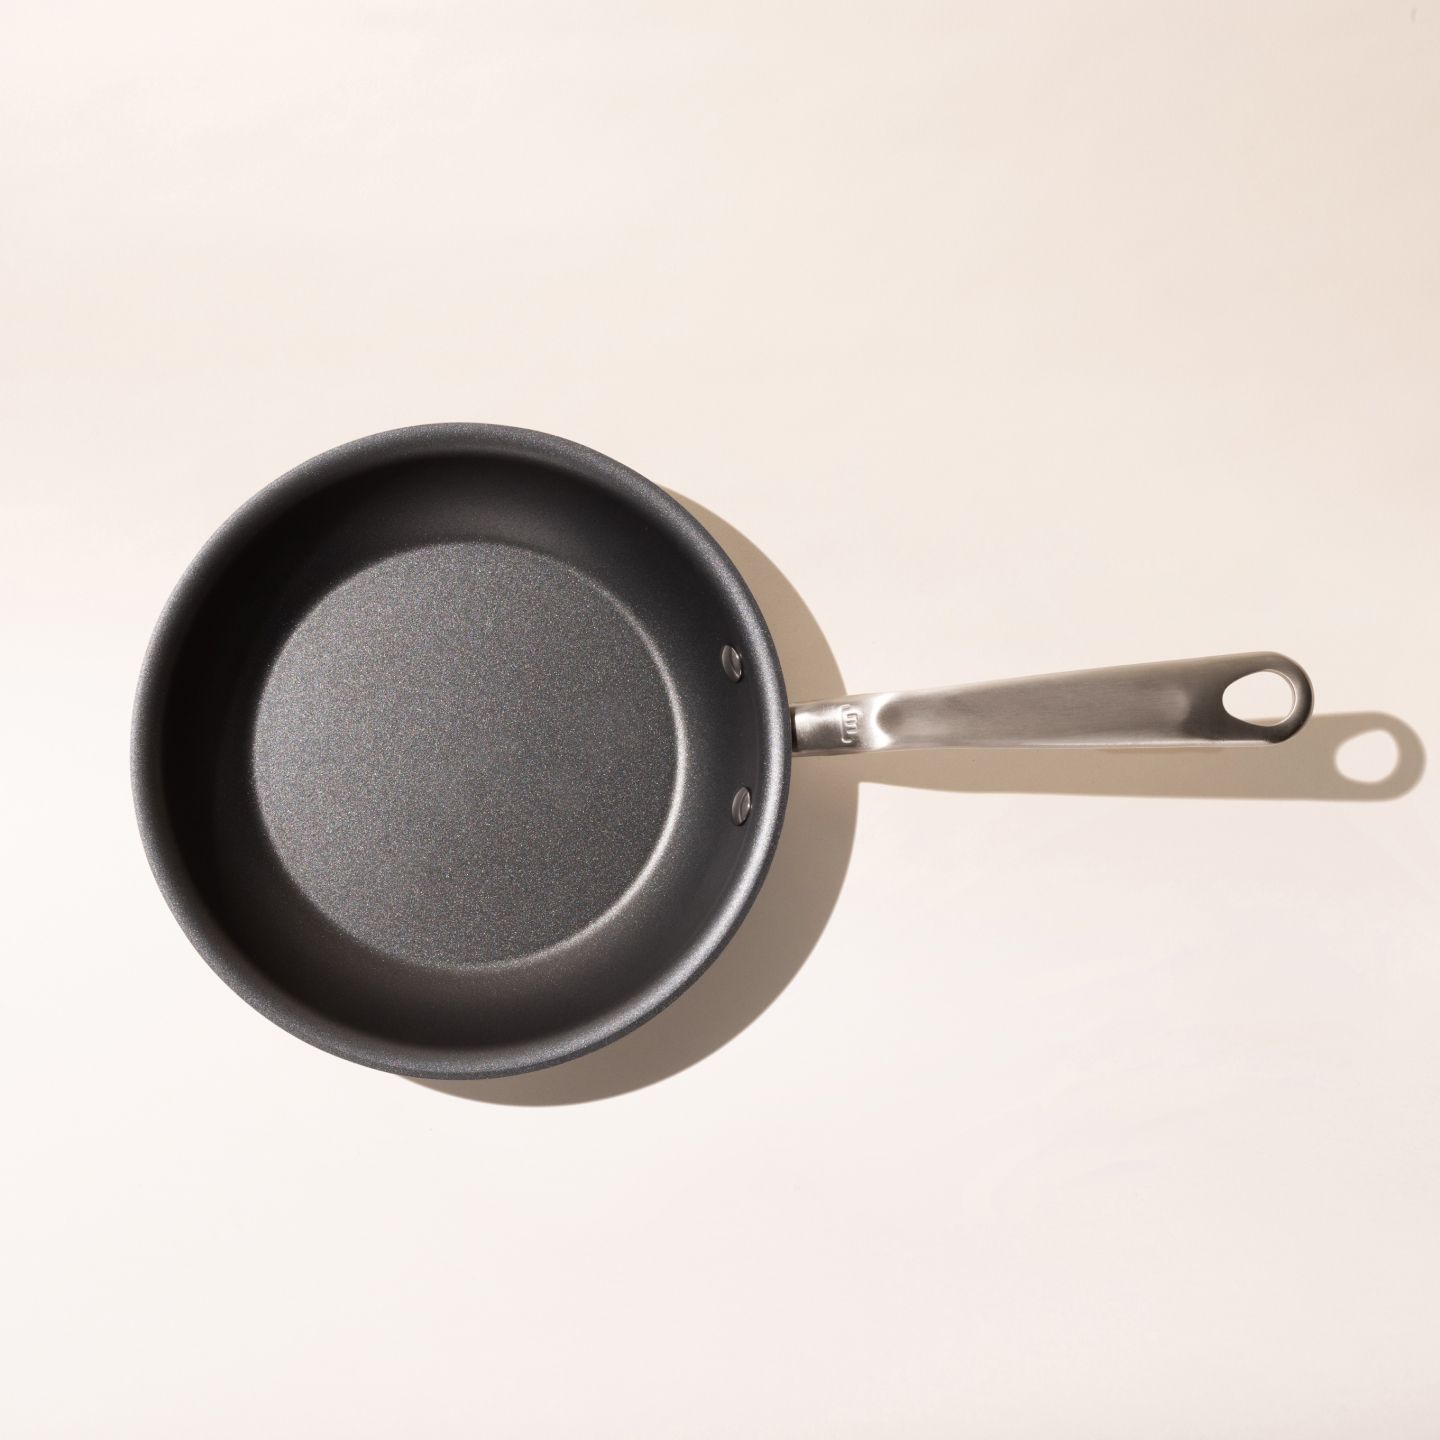 Stainless Steel Nonstick Fry Pans • My Made in the USA